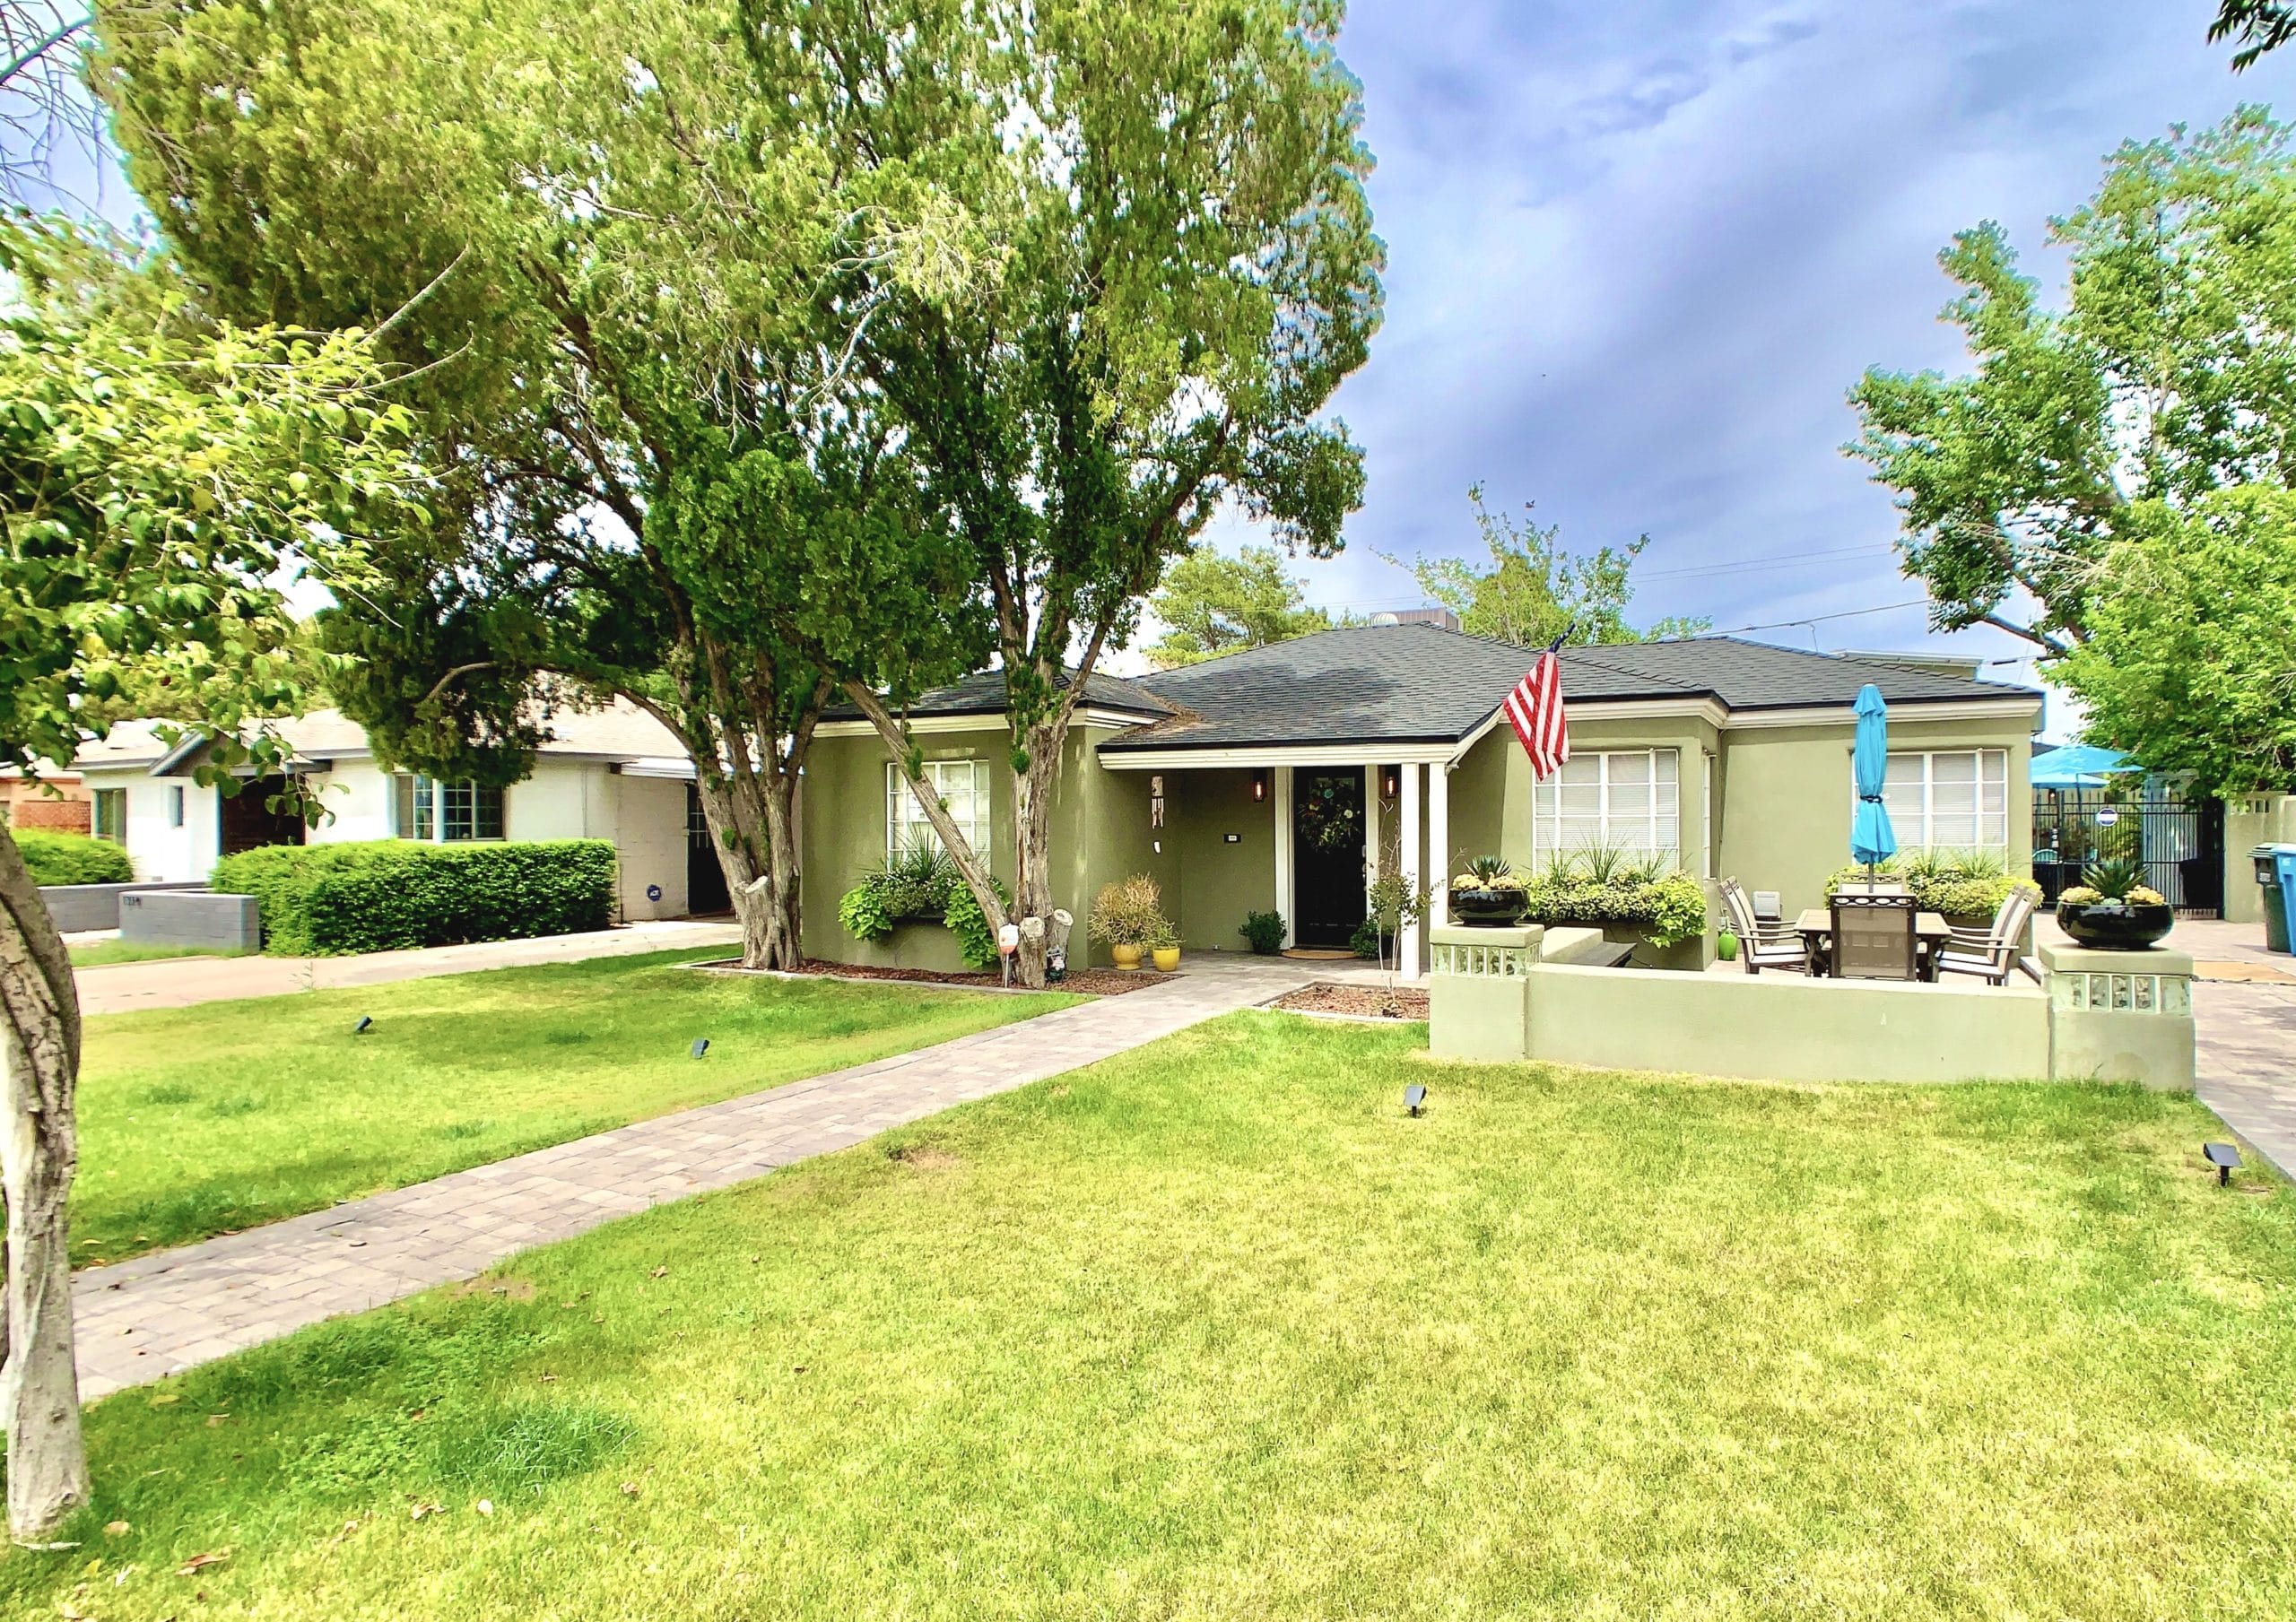 Woodlea-historic-district-homes-for-sale